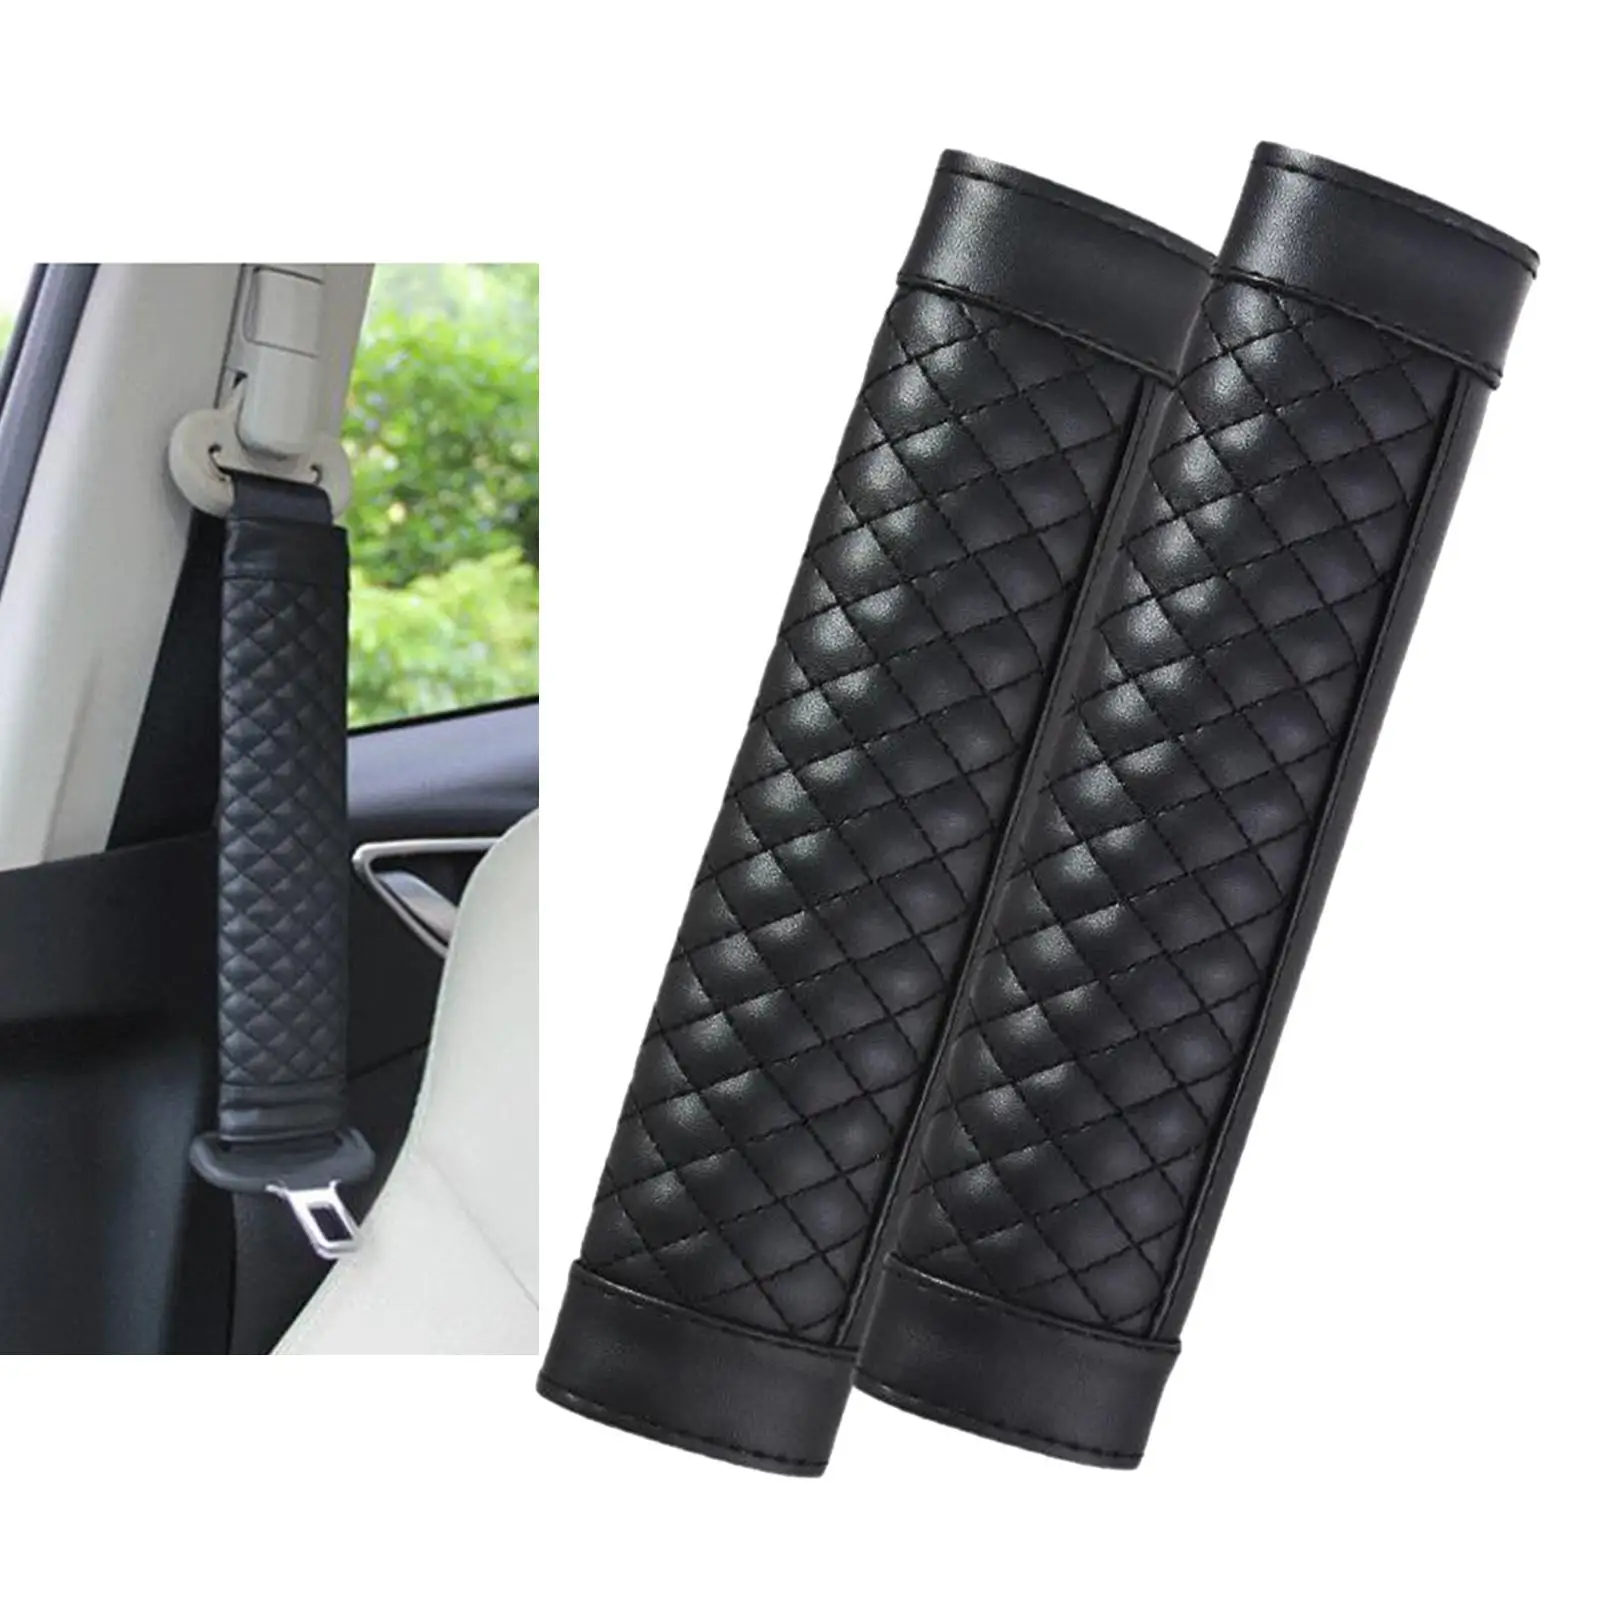 Soft   Shoulder Pad 2 PCS for a  Comfortable Driving  All Cars and Backpack